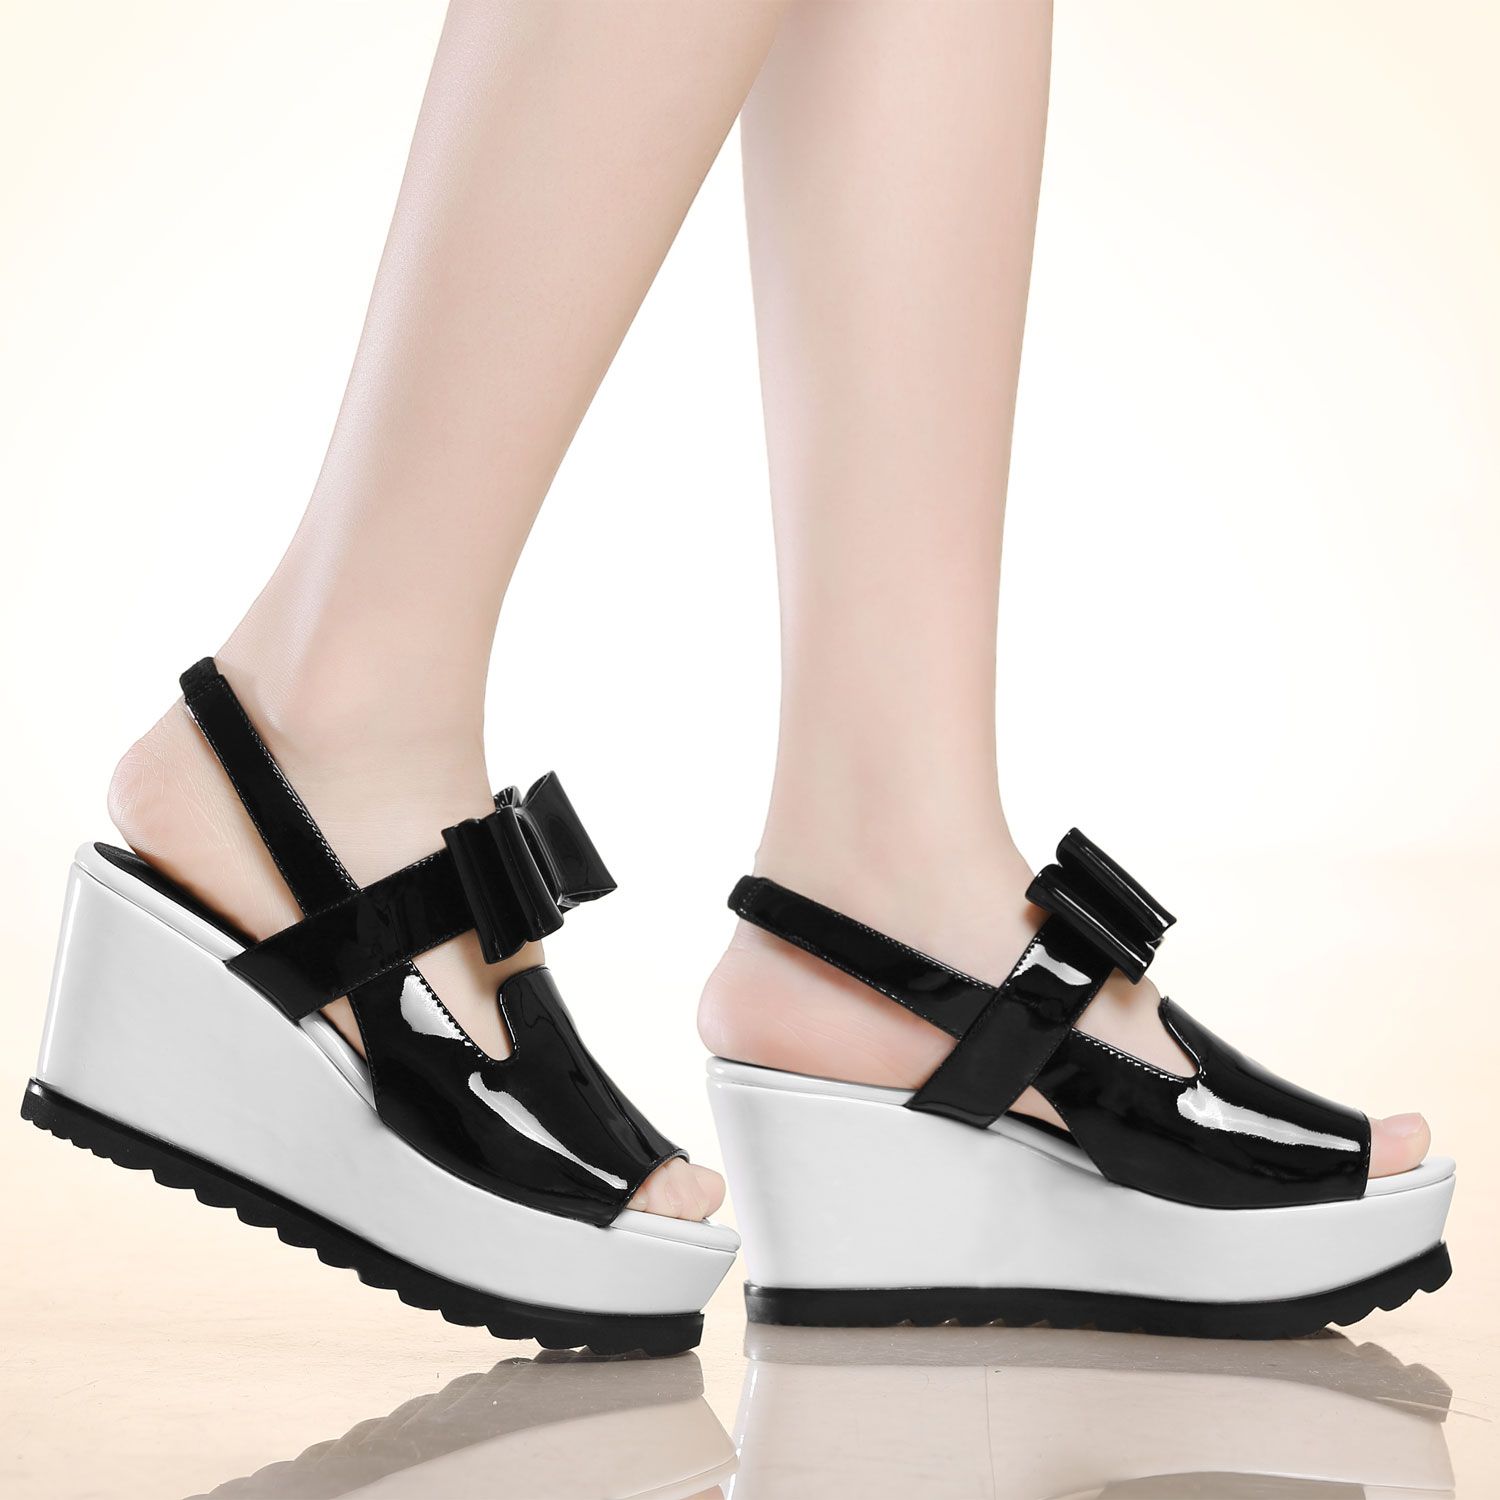 Komaic Leather Women Wedge Sandals Platform Women Sandals Shoes With ...